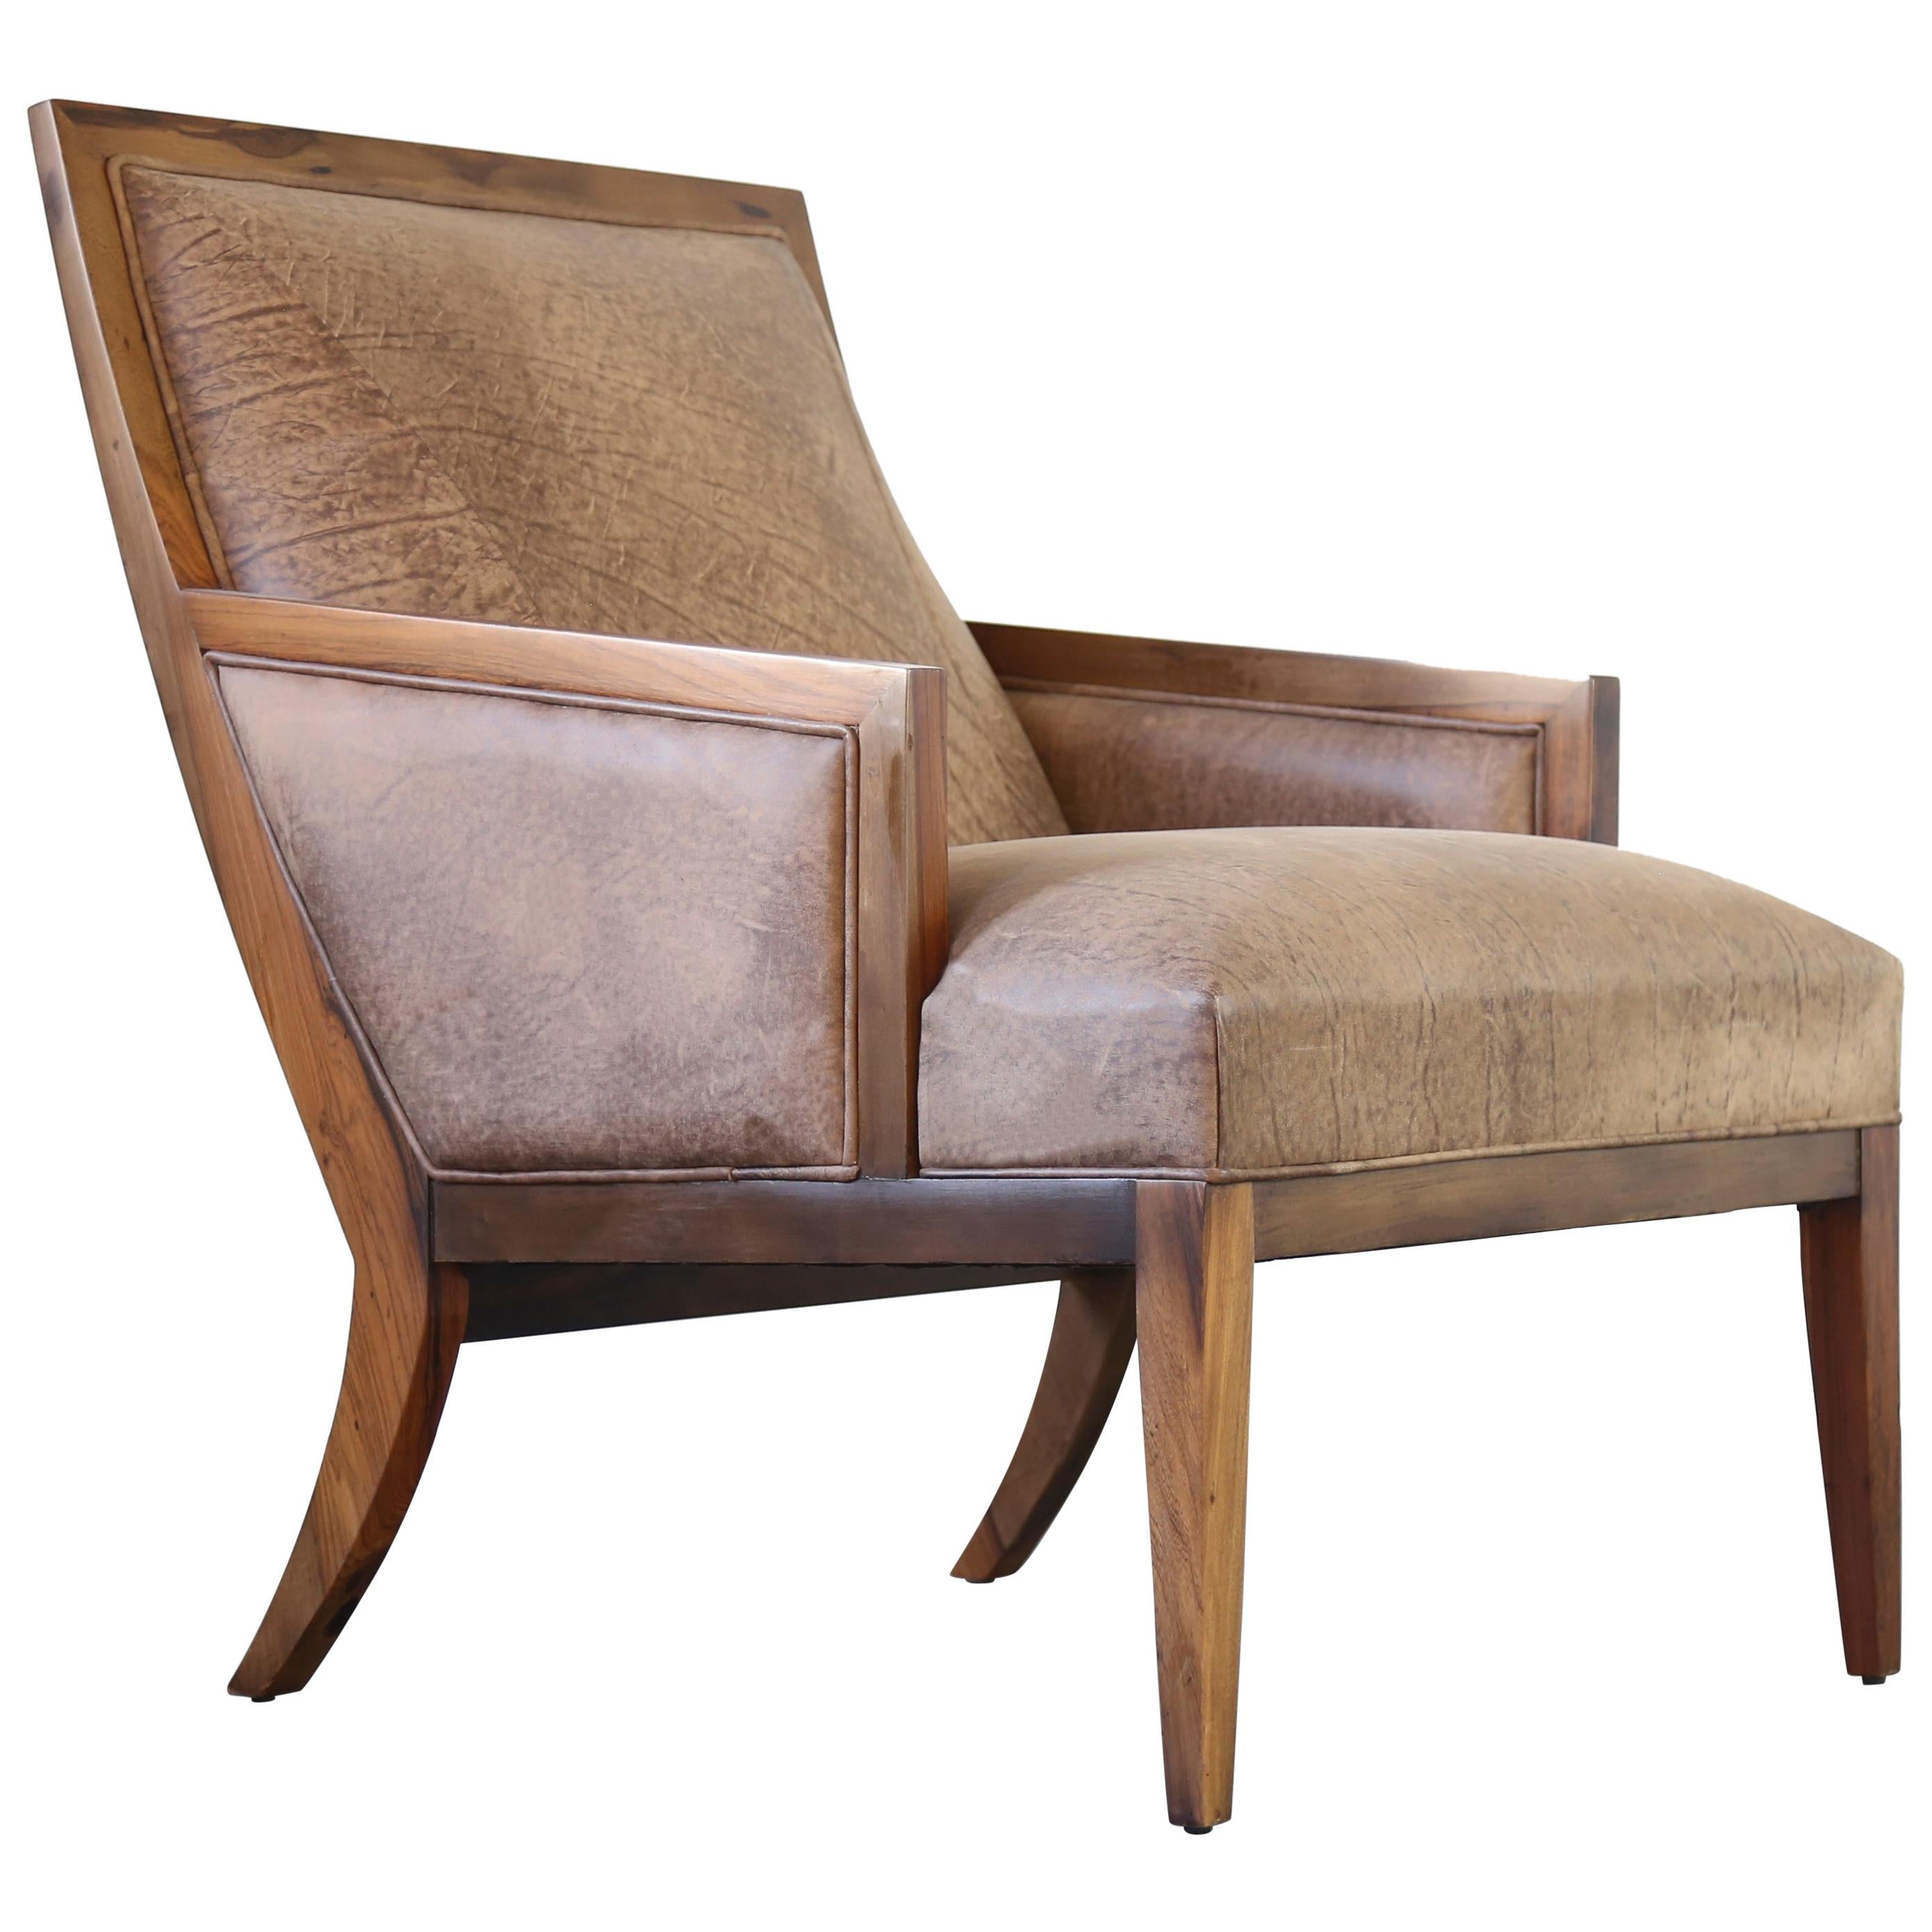 Contemporary Wood and Leather Lounge Chair from Costantini, Belgrano